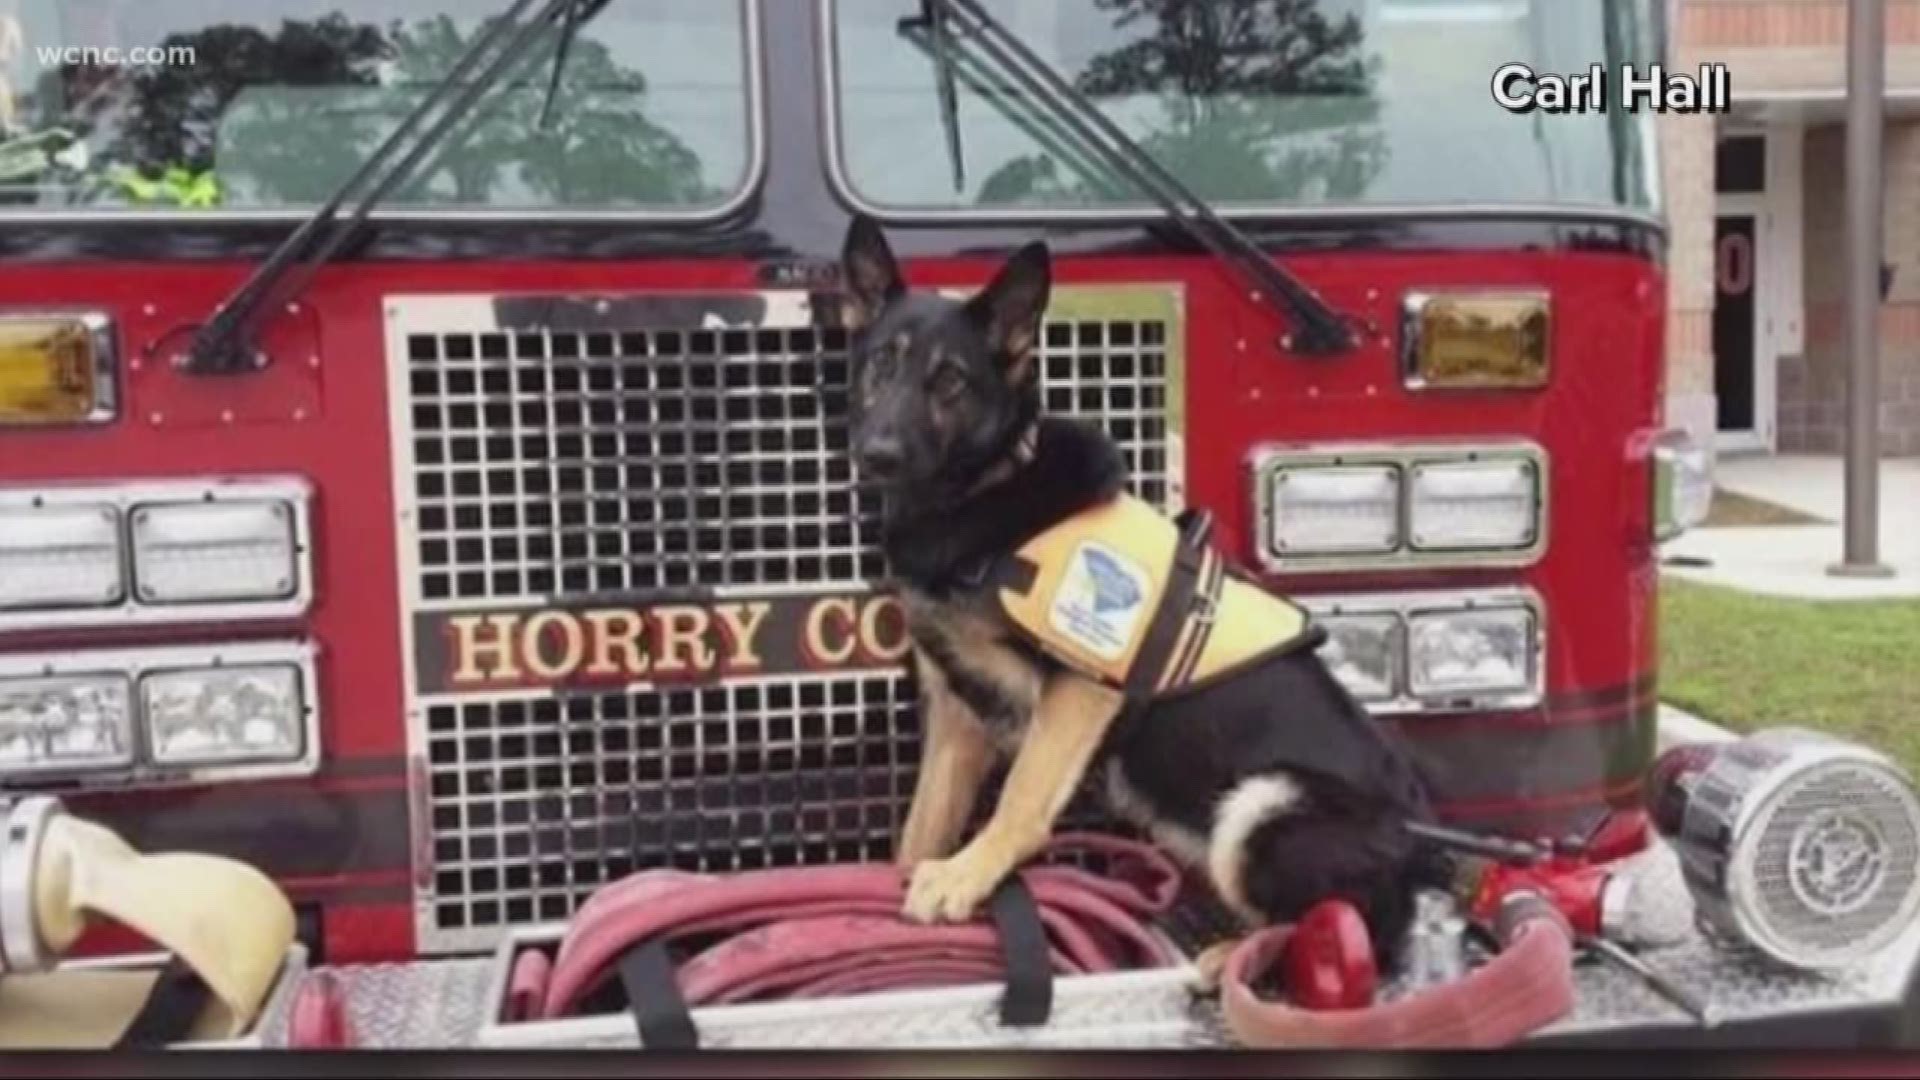 Firefighters in Horry County, S.C. are asking for the public's help finding a stolen K9.